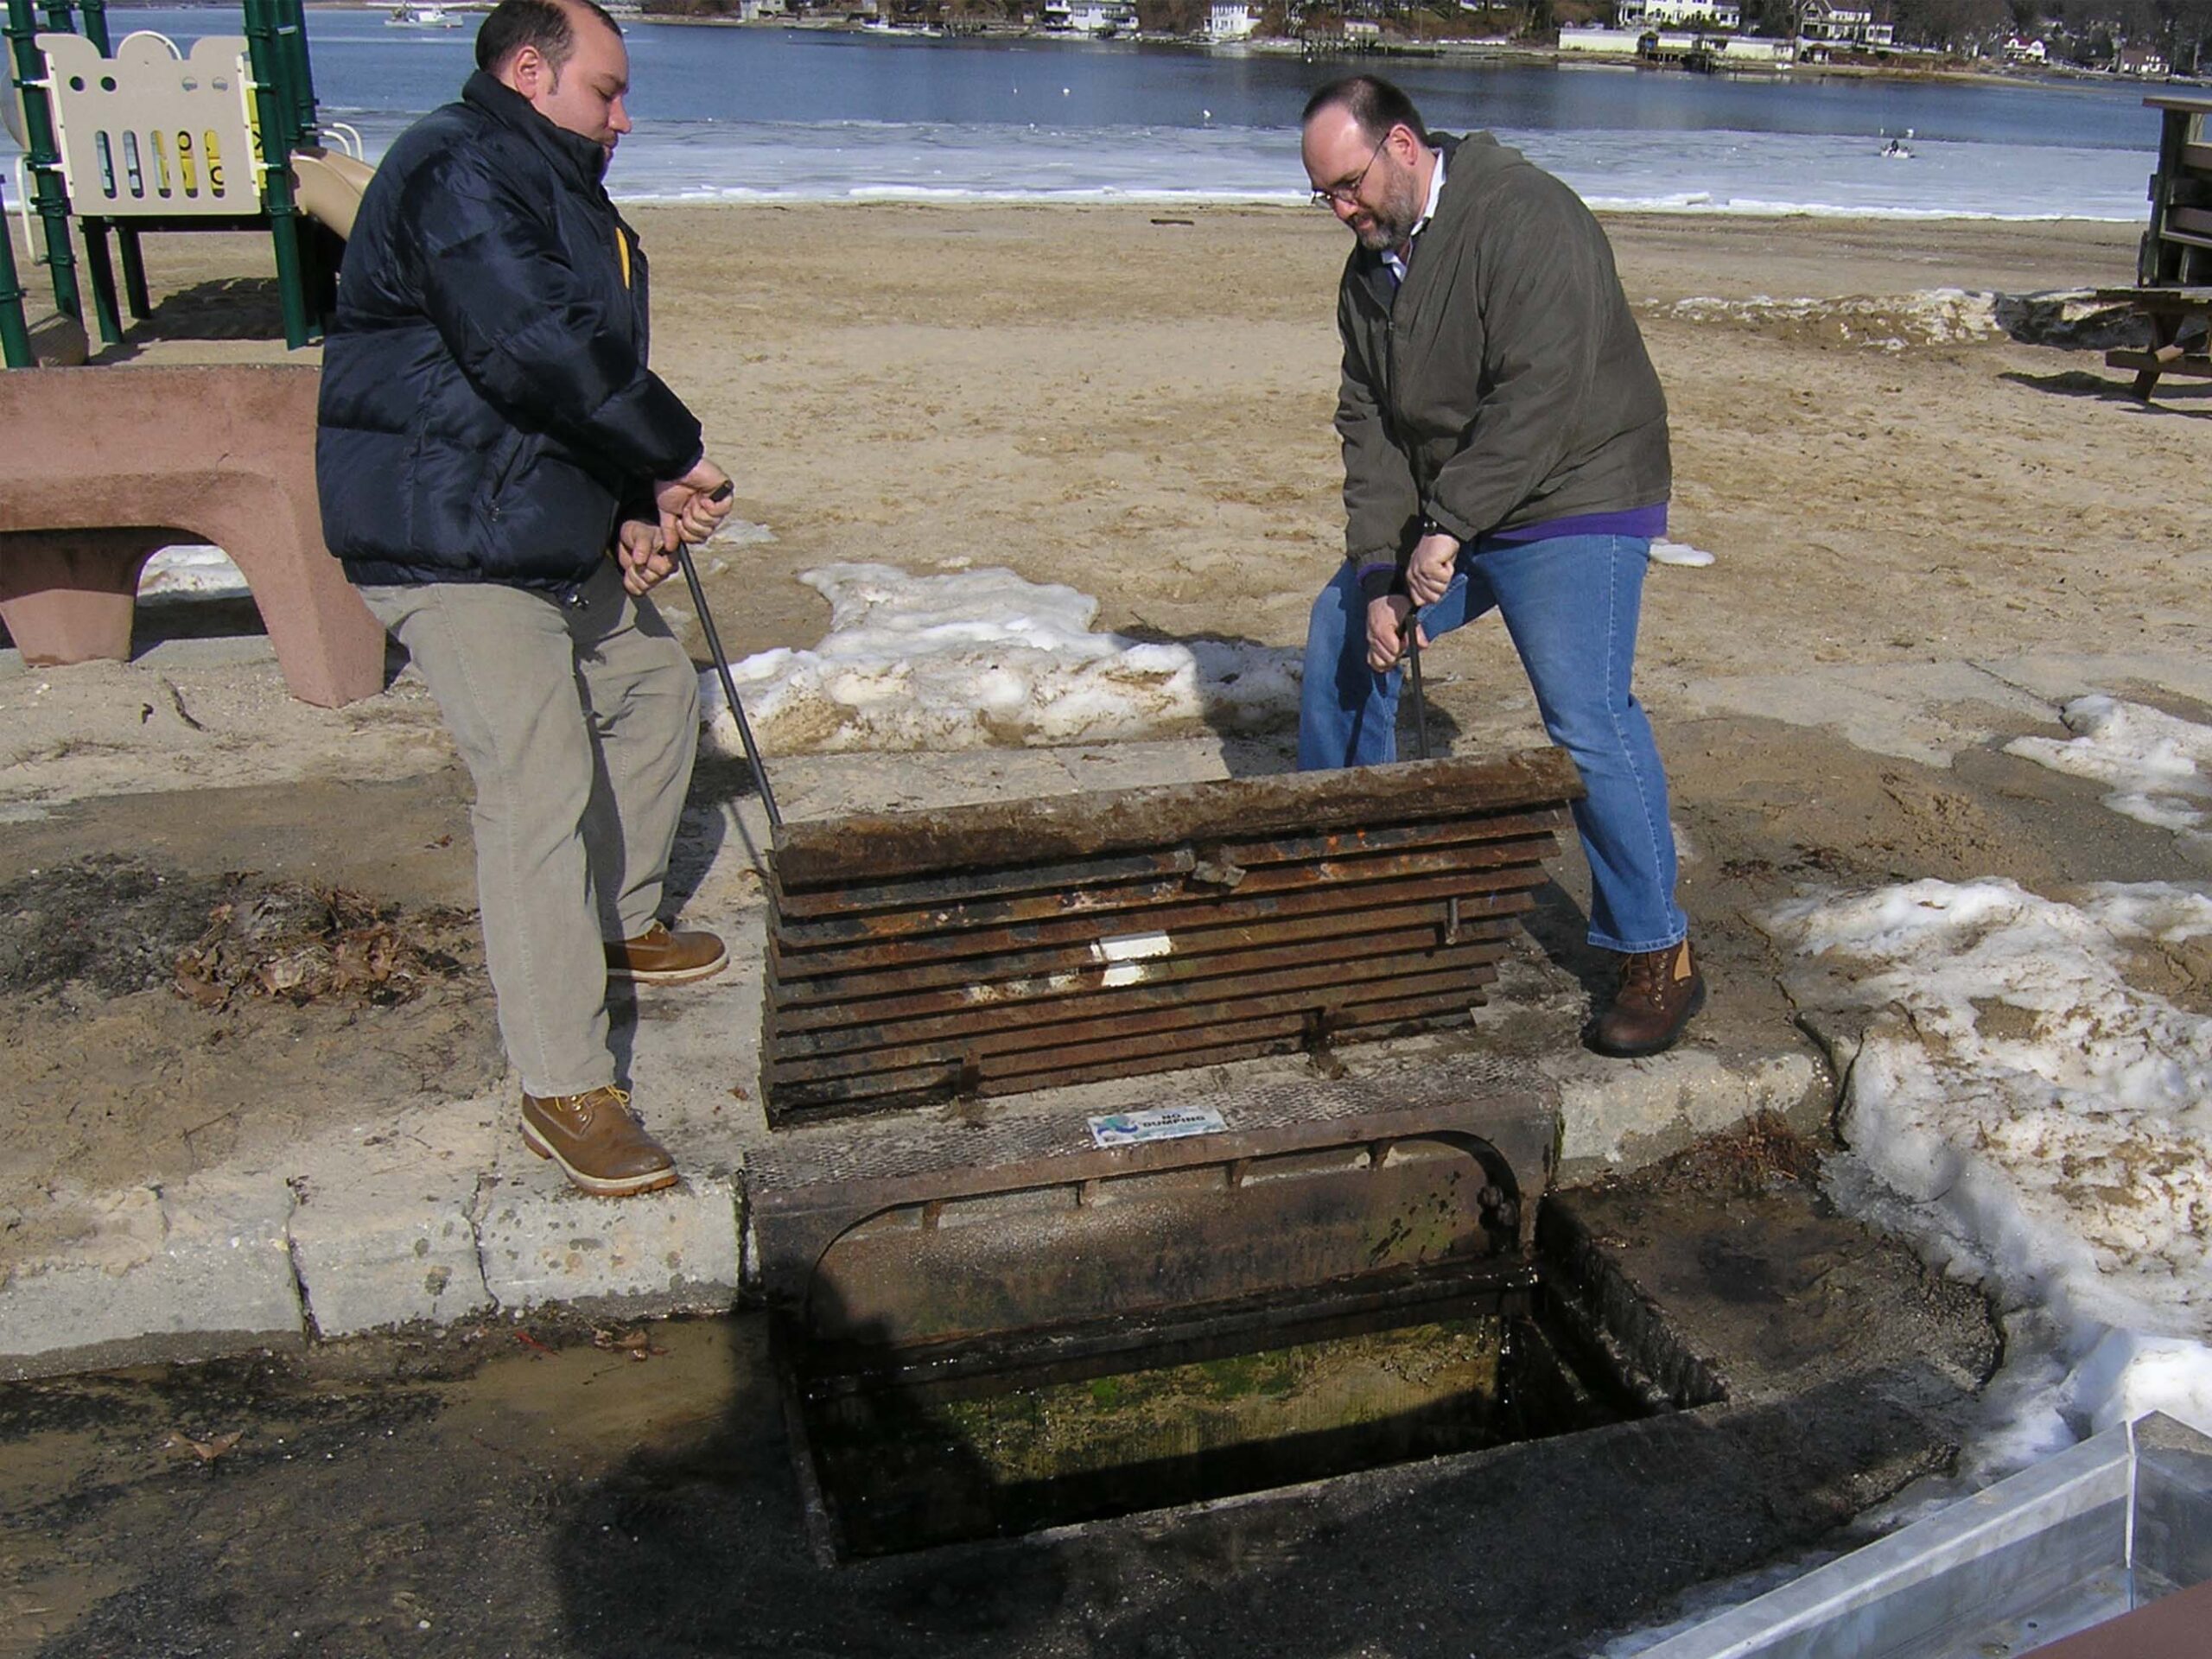 golds beach stormwater grate removal for stormbasin installation